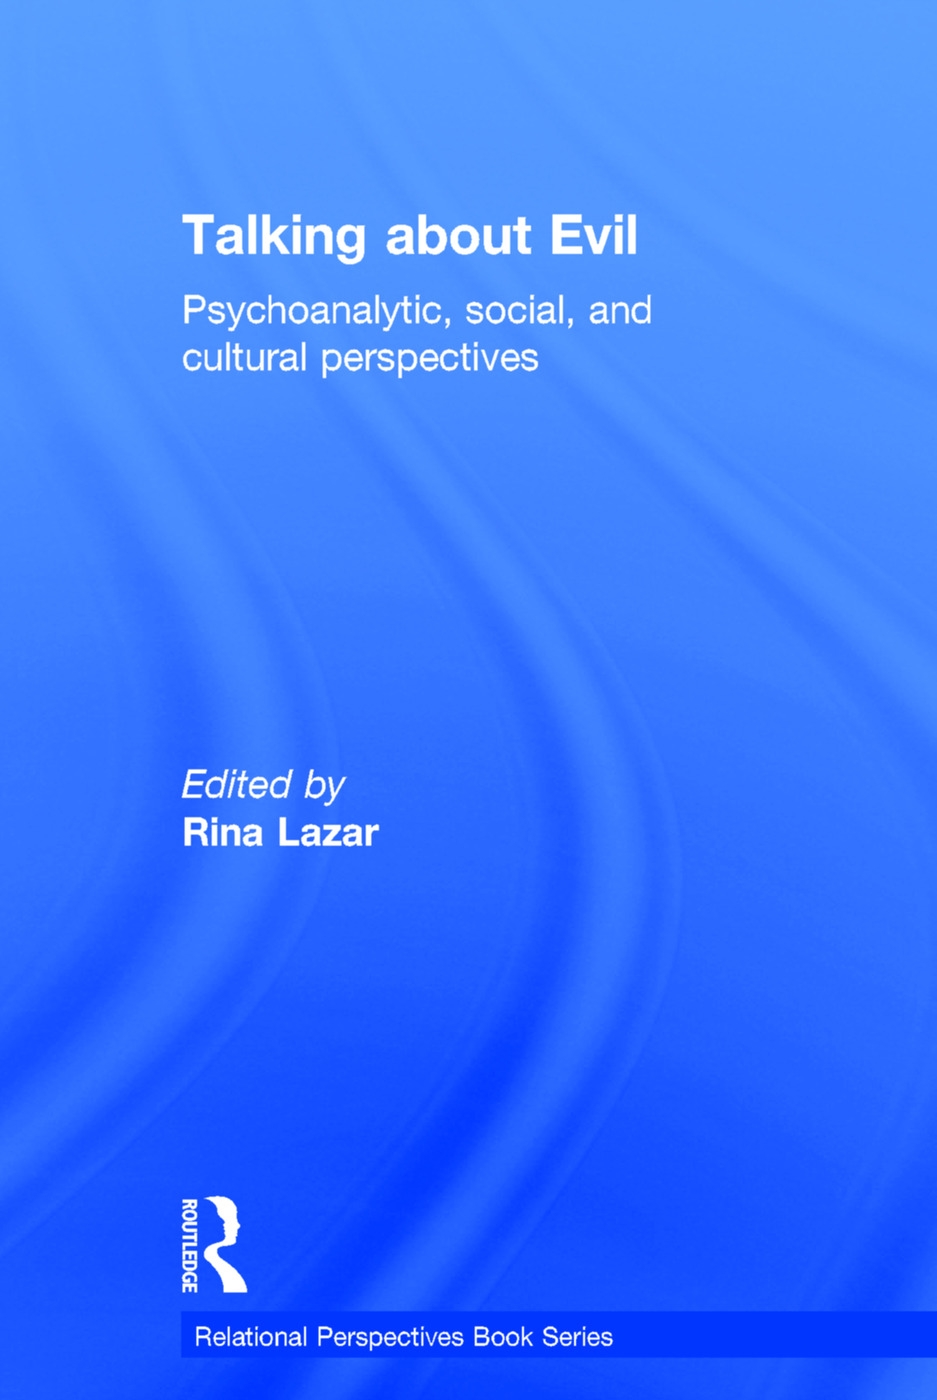 Talking about Evil: Psychoanalytic, Social, and Cultural Perspectives